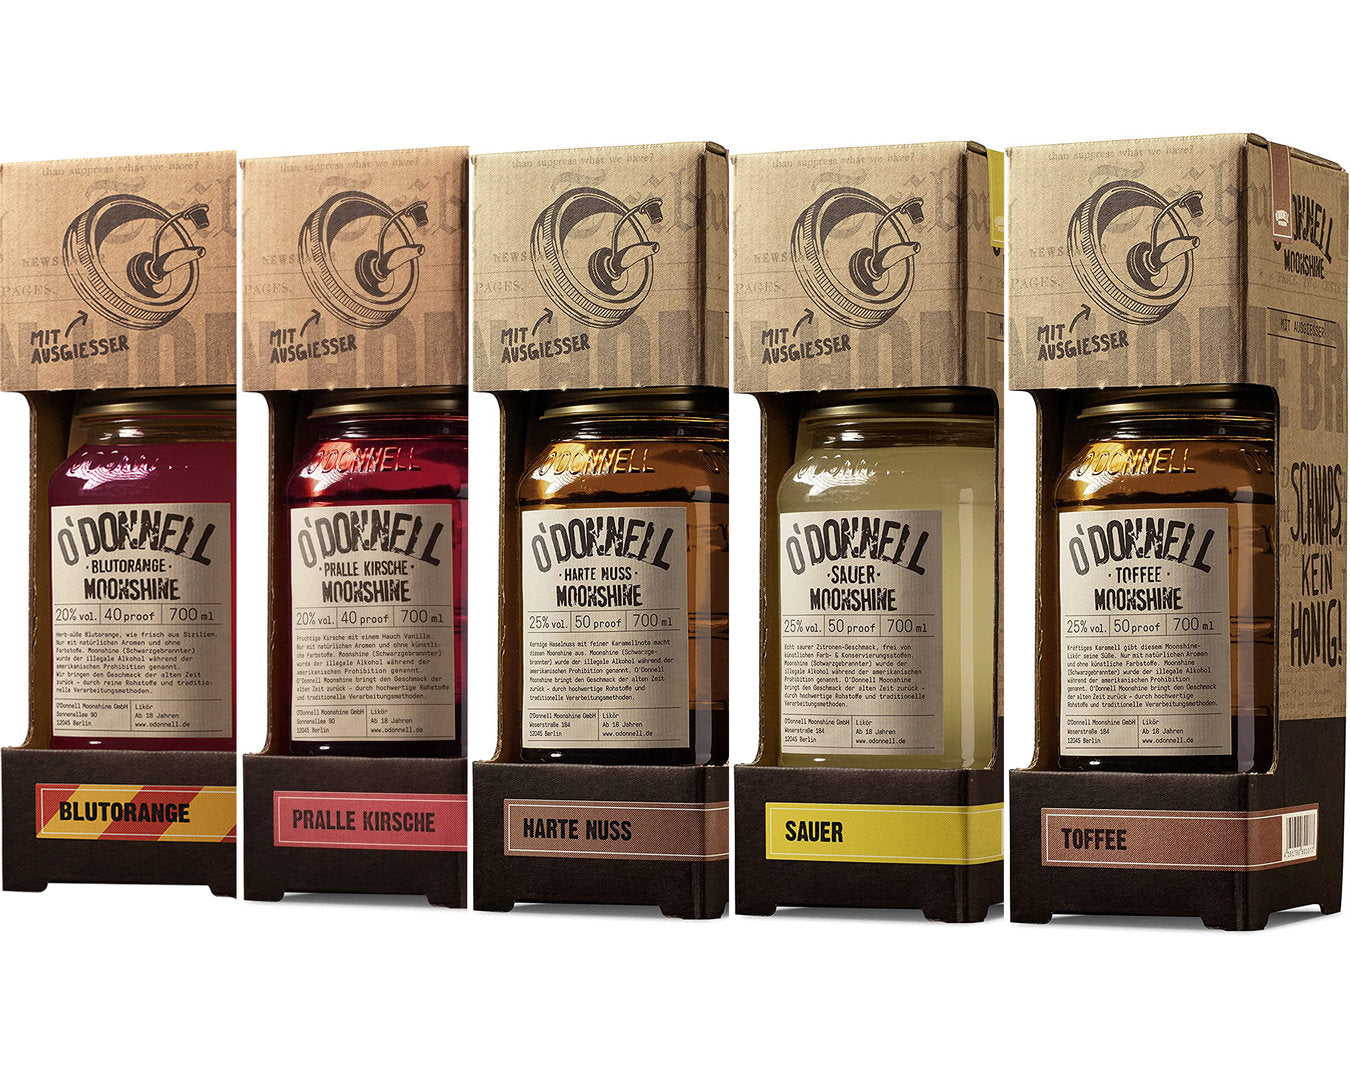 Liqueurs - O'Donnell Moonshine (700ml) online in the berlindeluxe shop